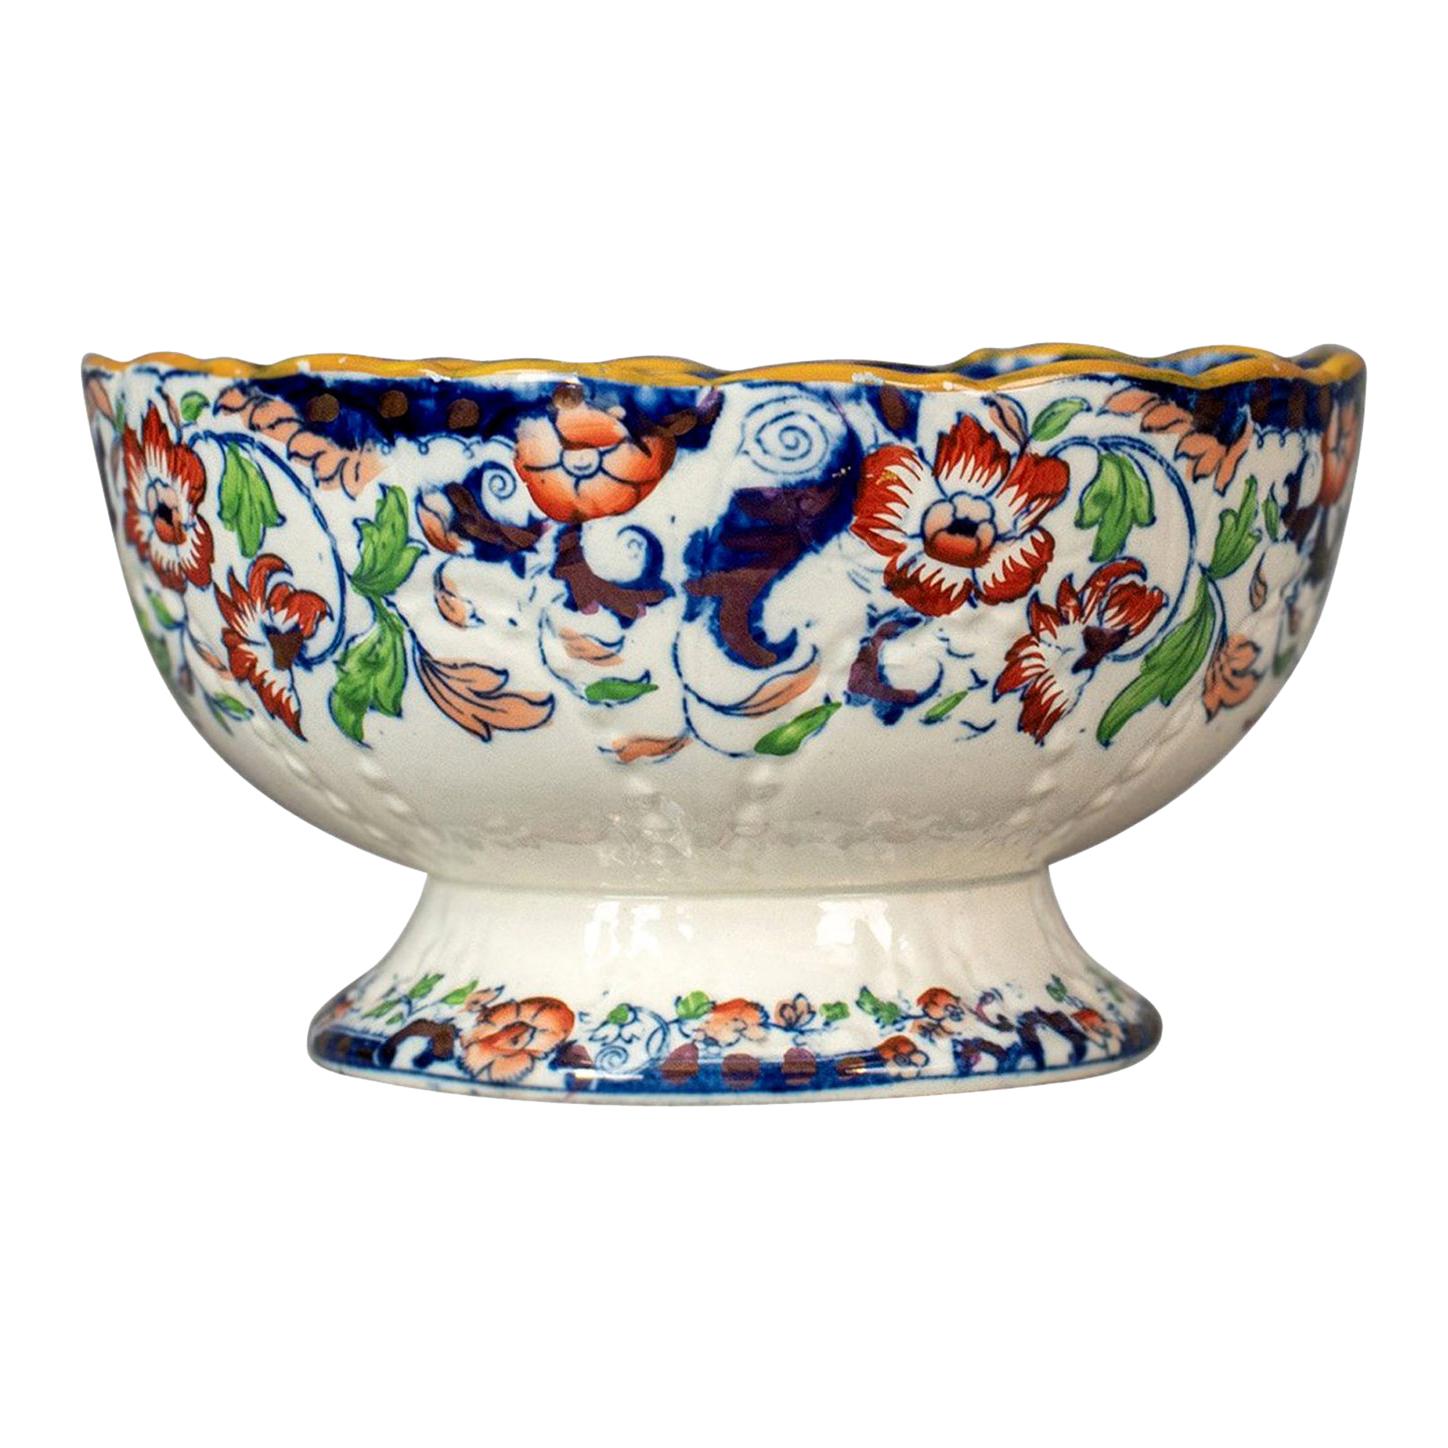 Antique Footed Bowl, Blue, White and Ochre, Ironstone, Fruit, circa 1900